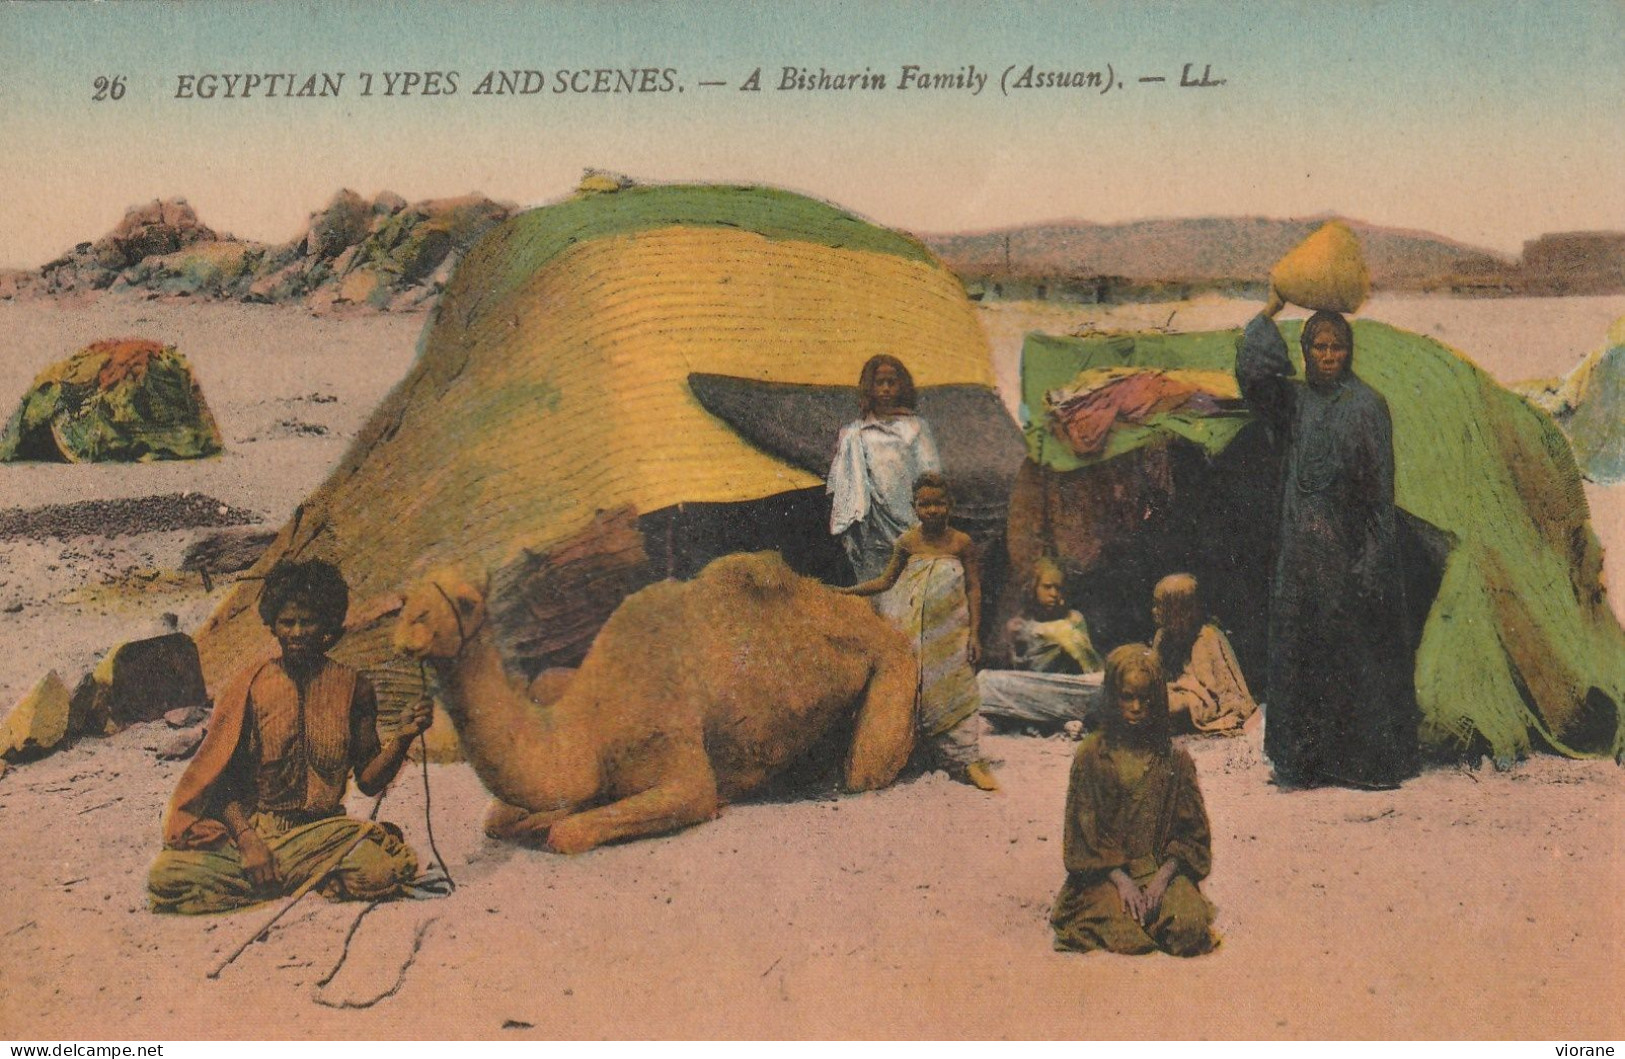 Egyptian Types And Scenes - A Bisharin Family (Assuan) - Aswan